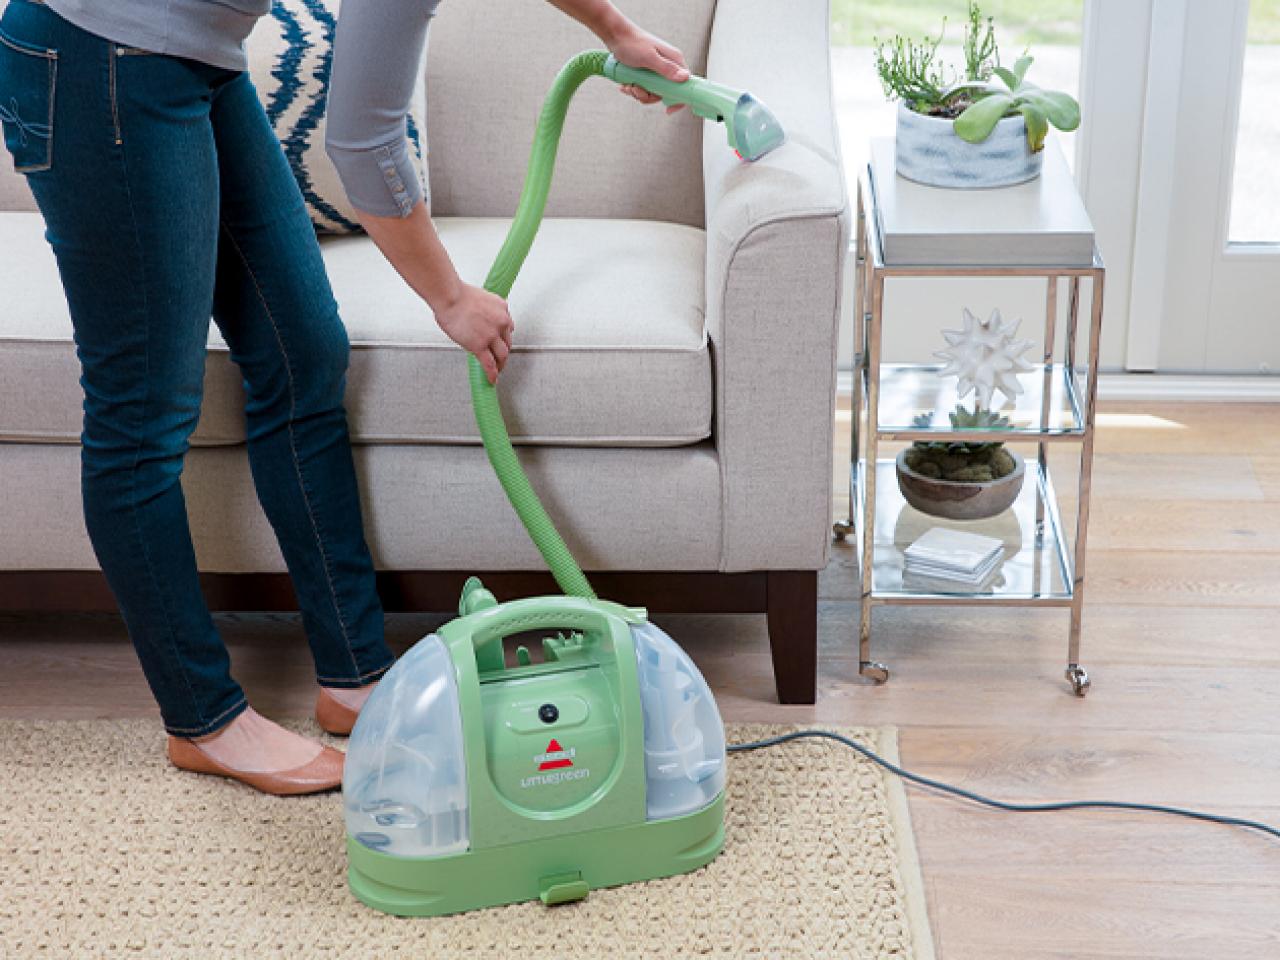 https://food.fnr.sndimg.com/content/dam/images/food/products/2023/10/10/rx_amazon_bissell-little-green-portable-carpet-and-upholstery-cleaner.jpeg.rend.hgtvcom.1280.960.suffix/1696949294554.jpeg